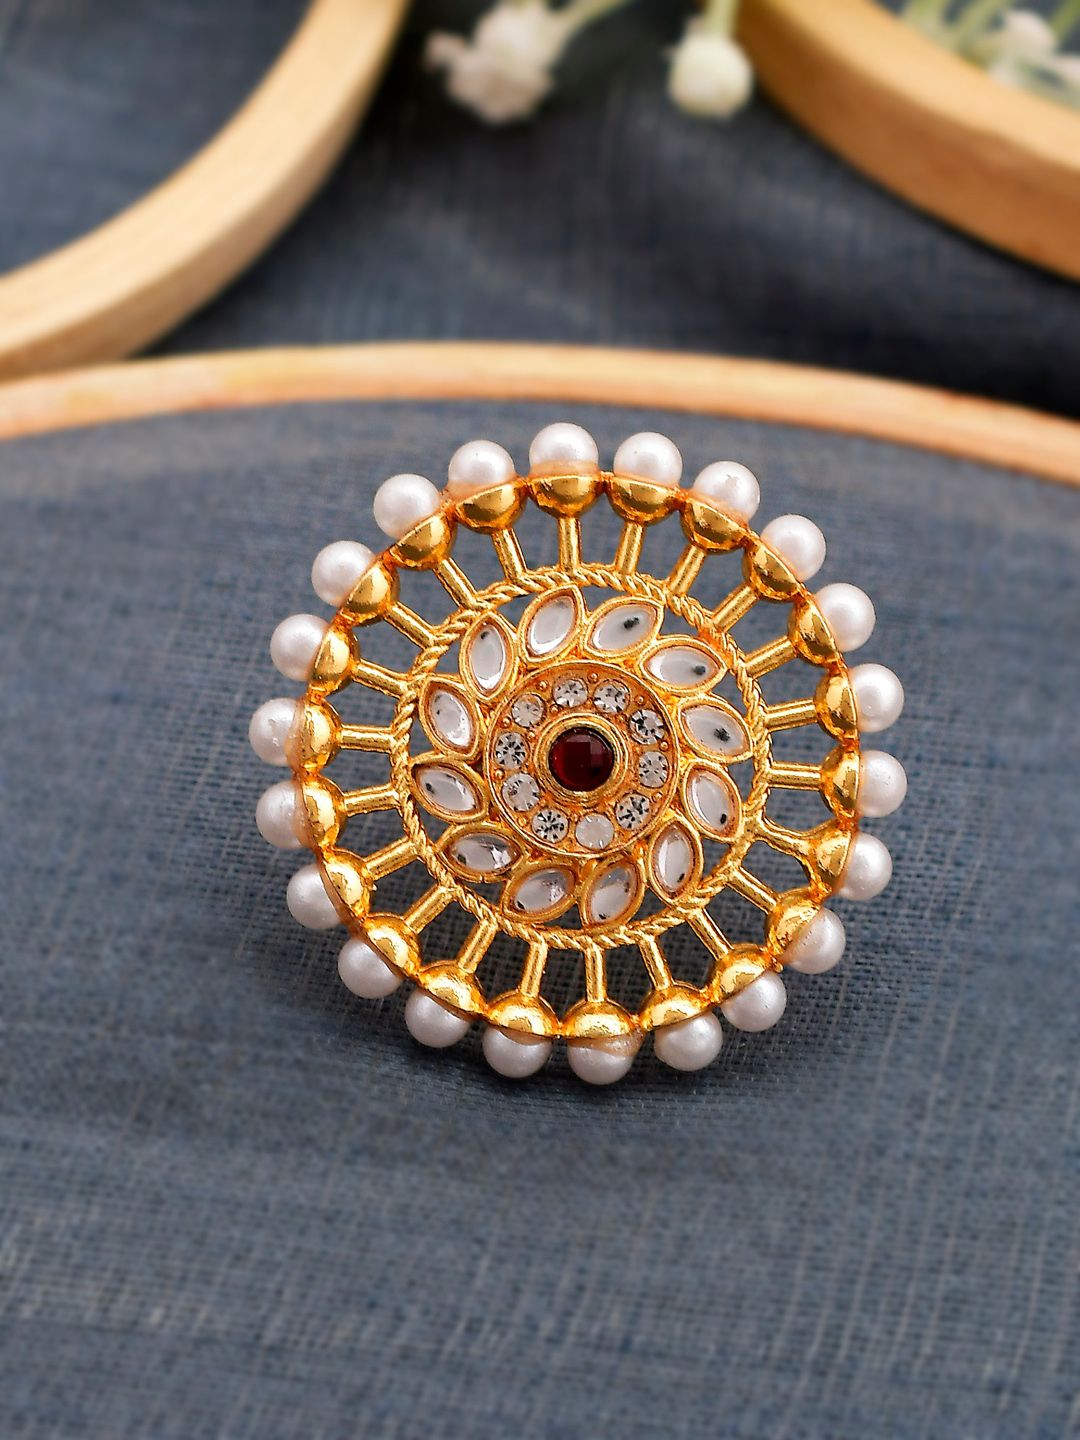 Silvermerc Designs Gold-Plated Pearl Meenakari Statement Ring Price in India